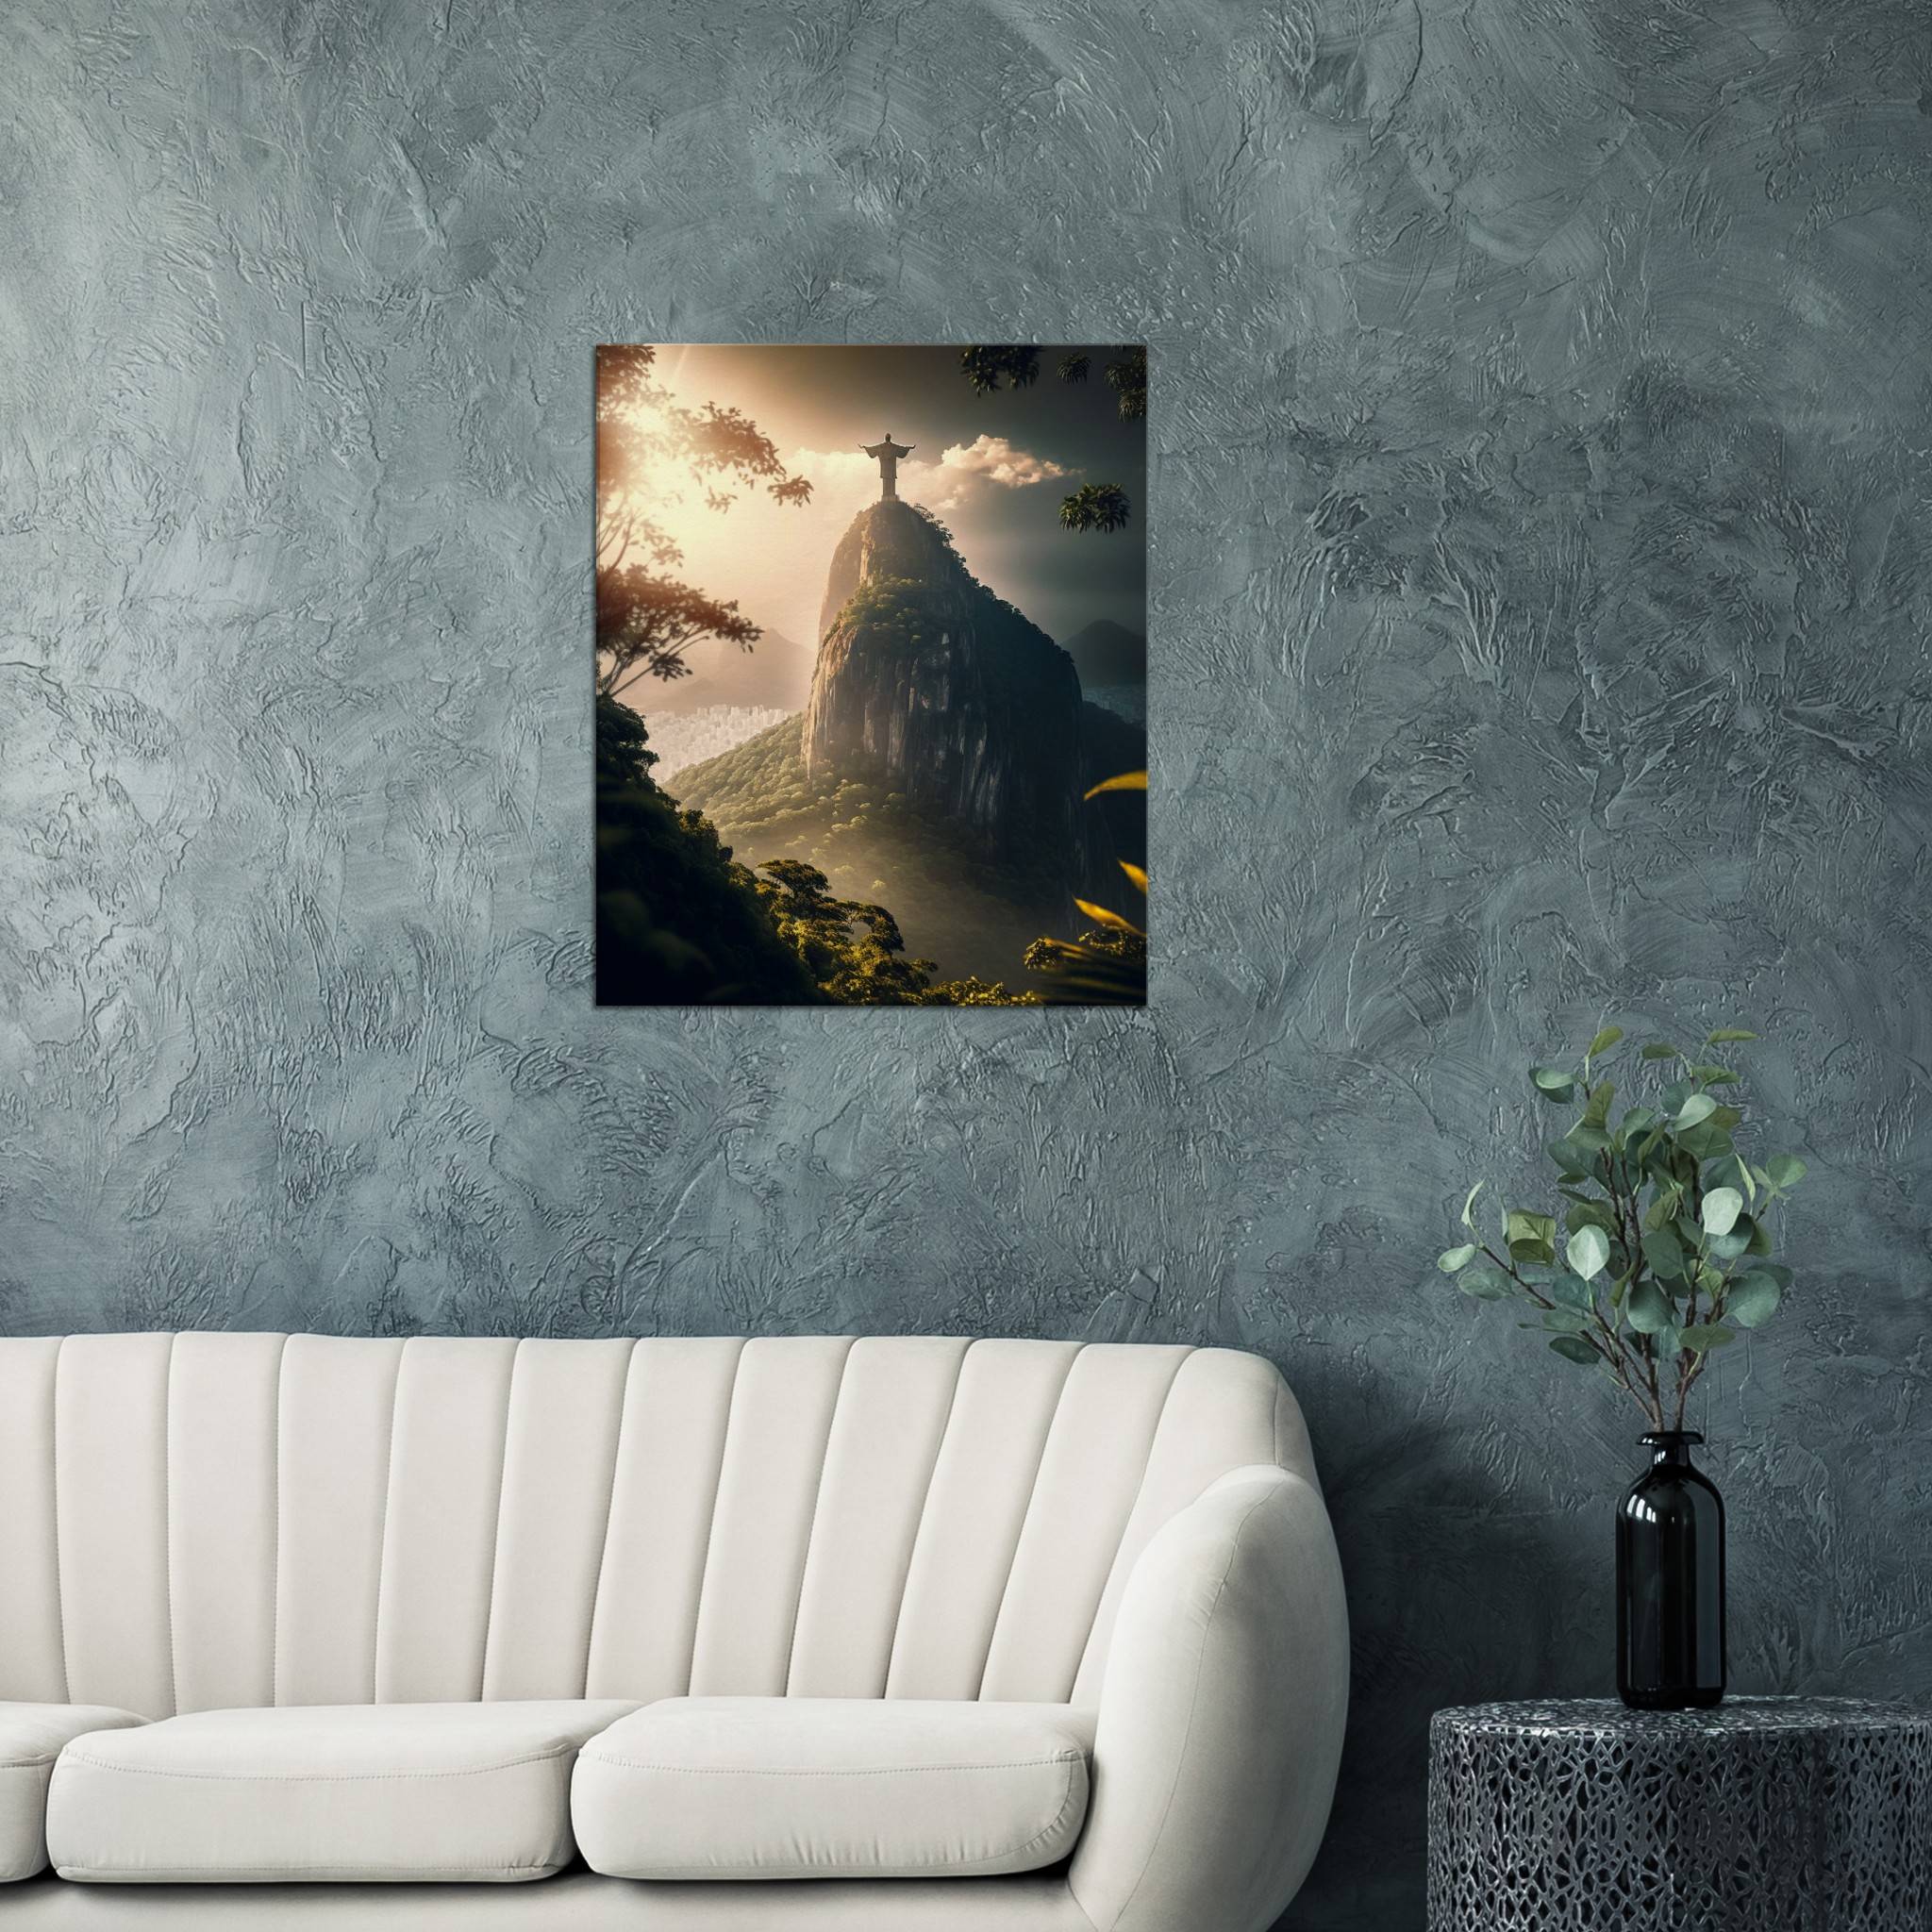 Christ the Redeemer 2 / 60 x 60cm (Canvas Print) Canvas Print Canvas reproduction The Pianist Print On Demand Fabled Gallery https://fabledgallery.art/product/christ-the-redeemer-2-60-x-60cm-canvas-print/